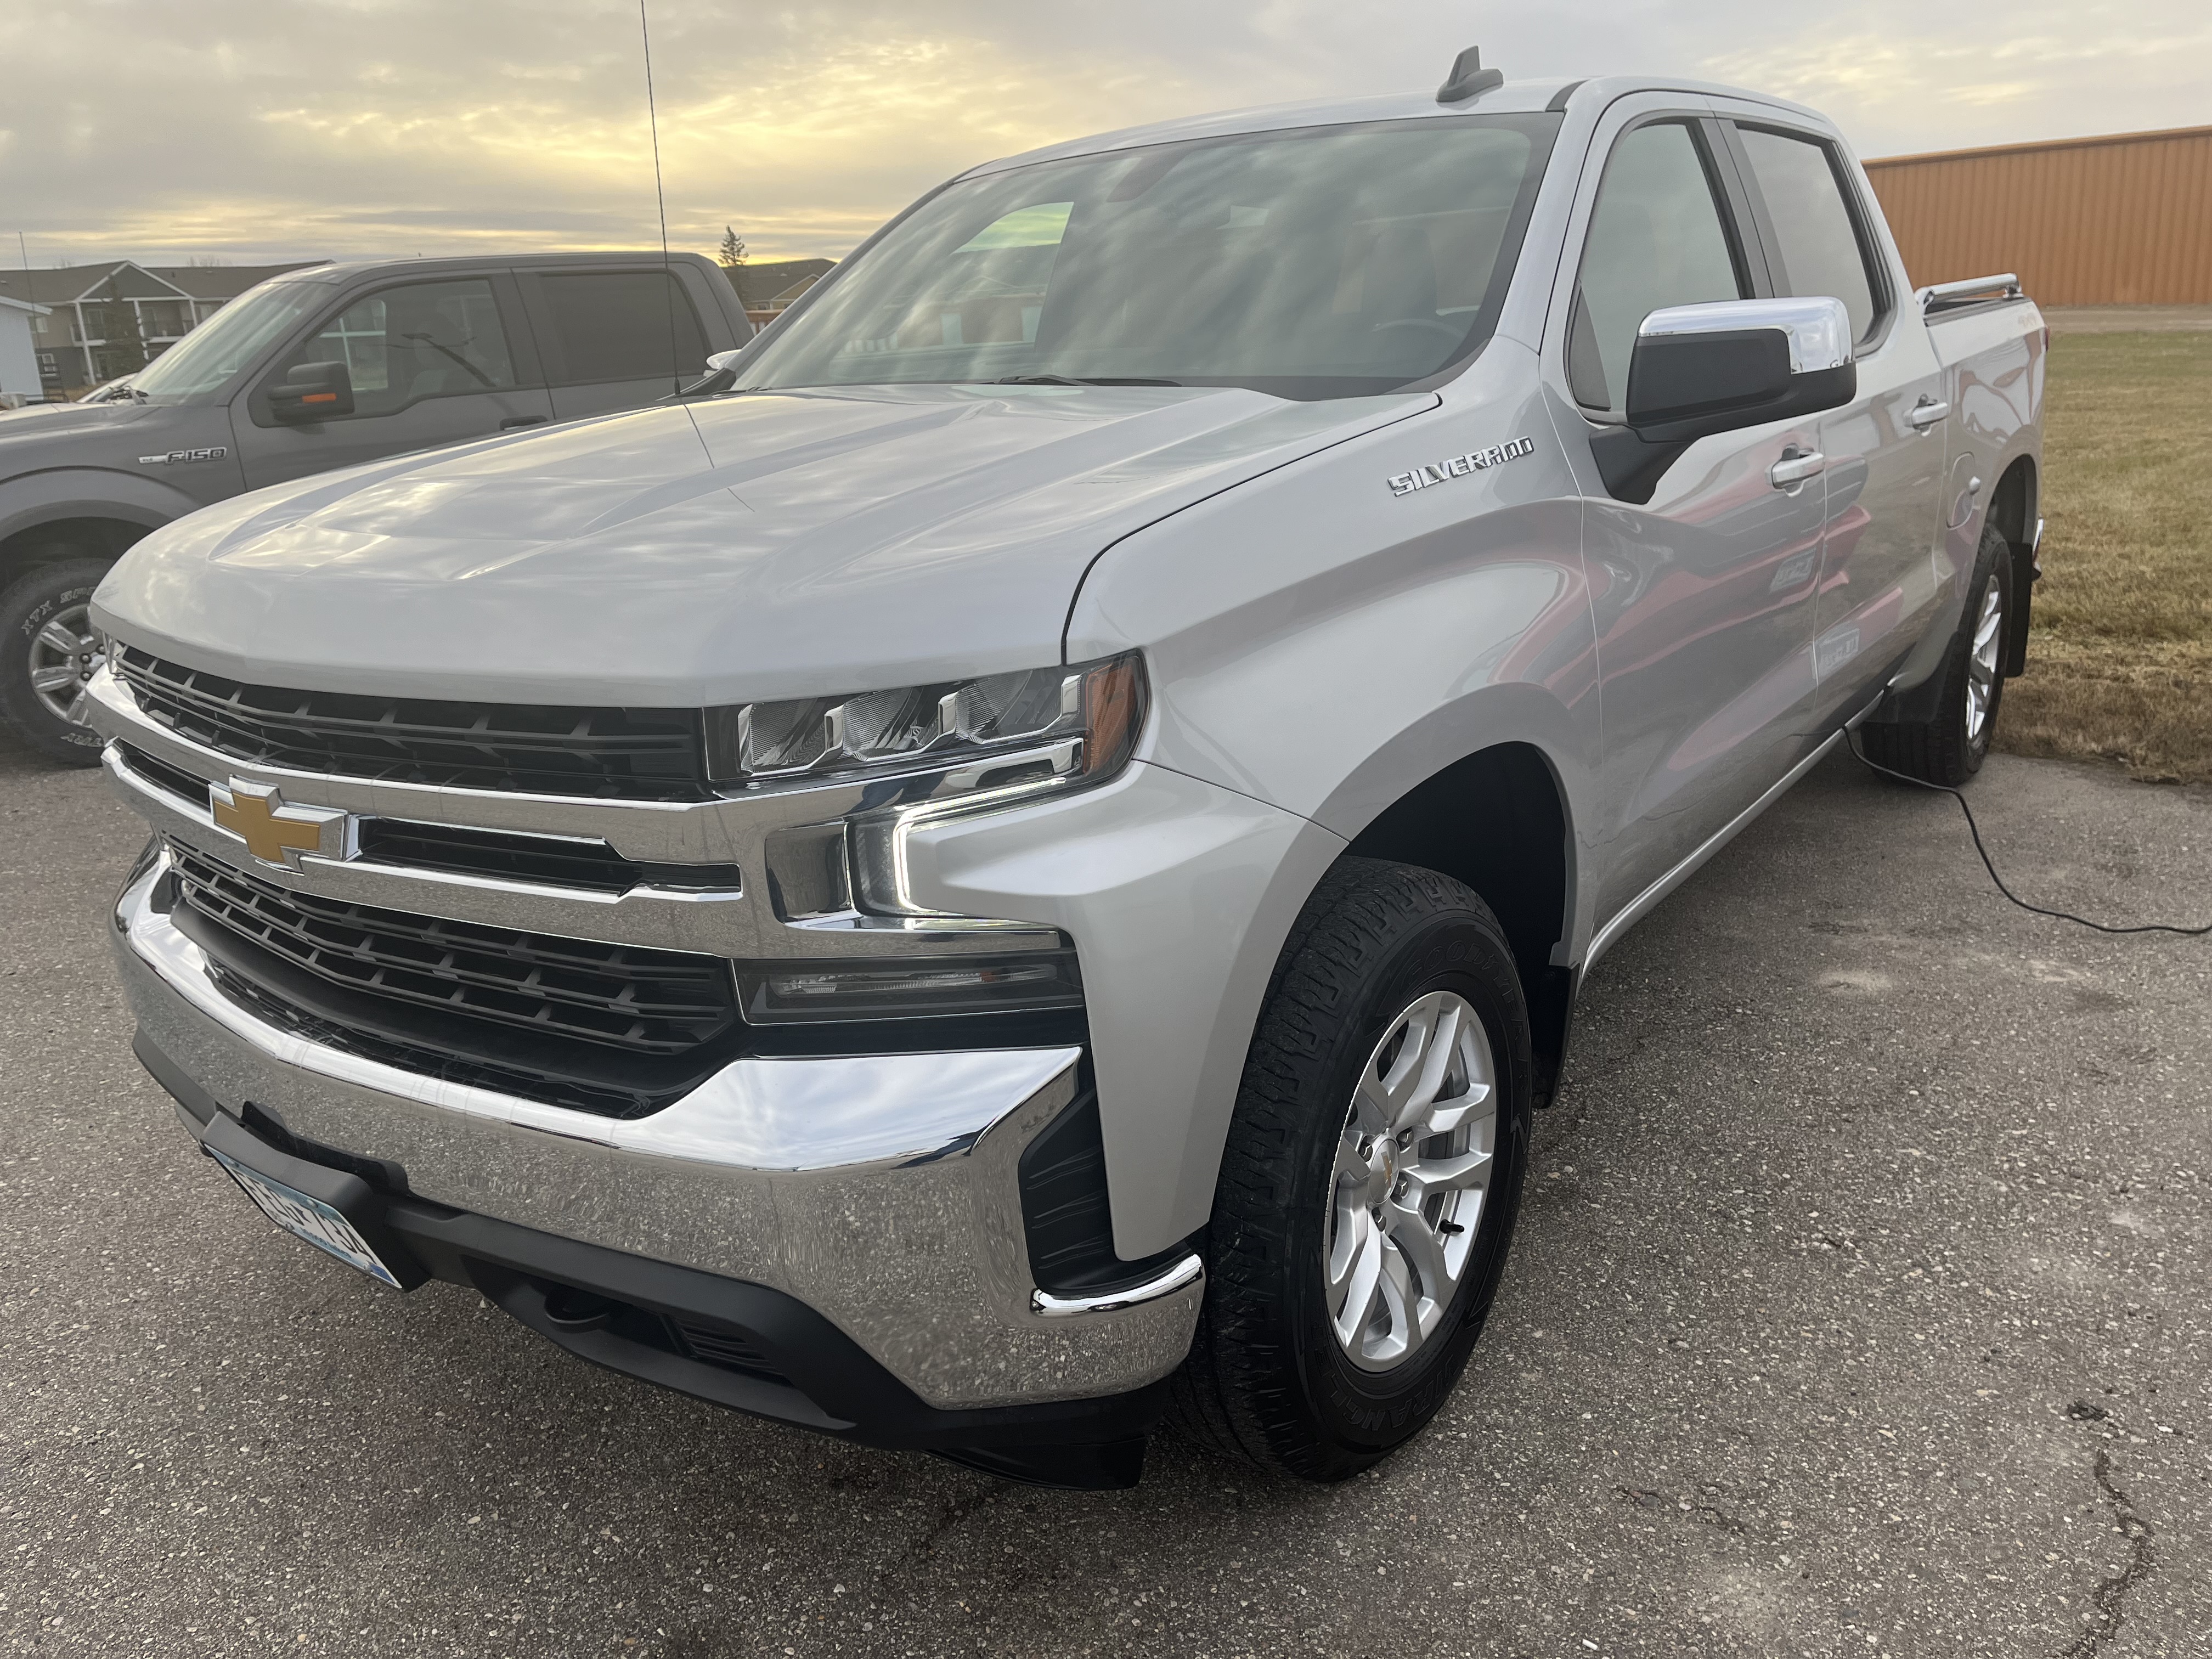 Used 2021 Chevrolet Silverado 1500 LT with VIN 1GCUYDED1MZ181480 for sale in Thief River Falls, Minnesota